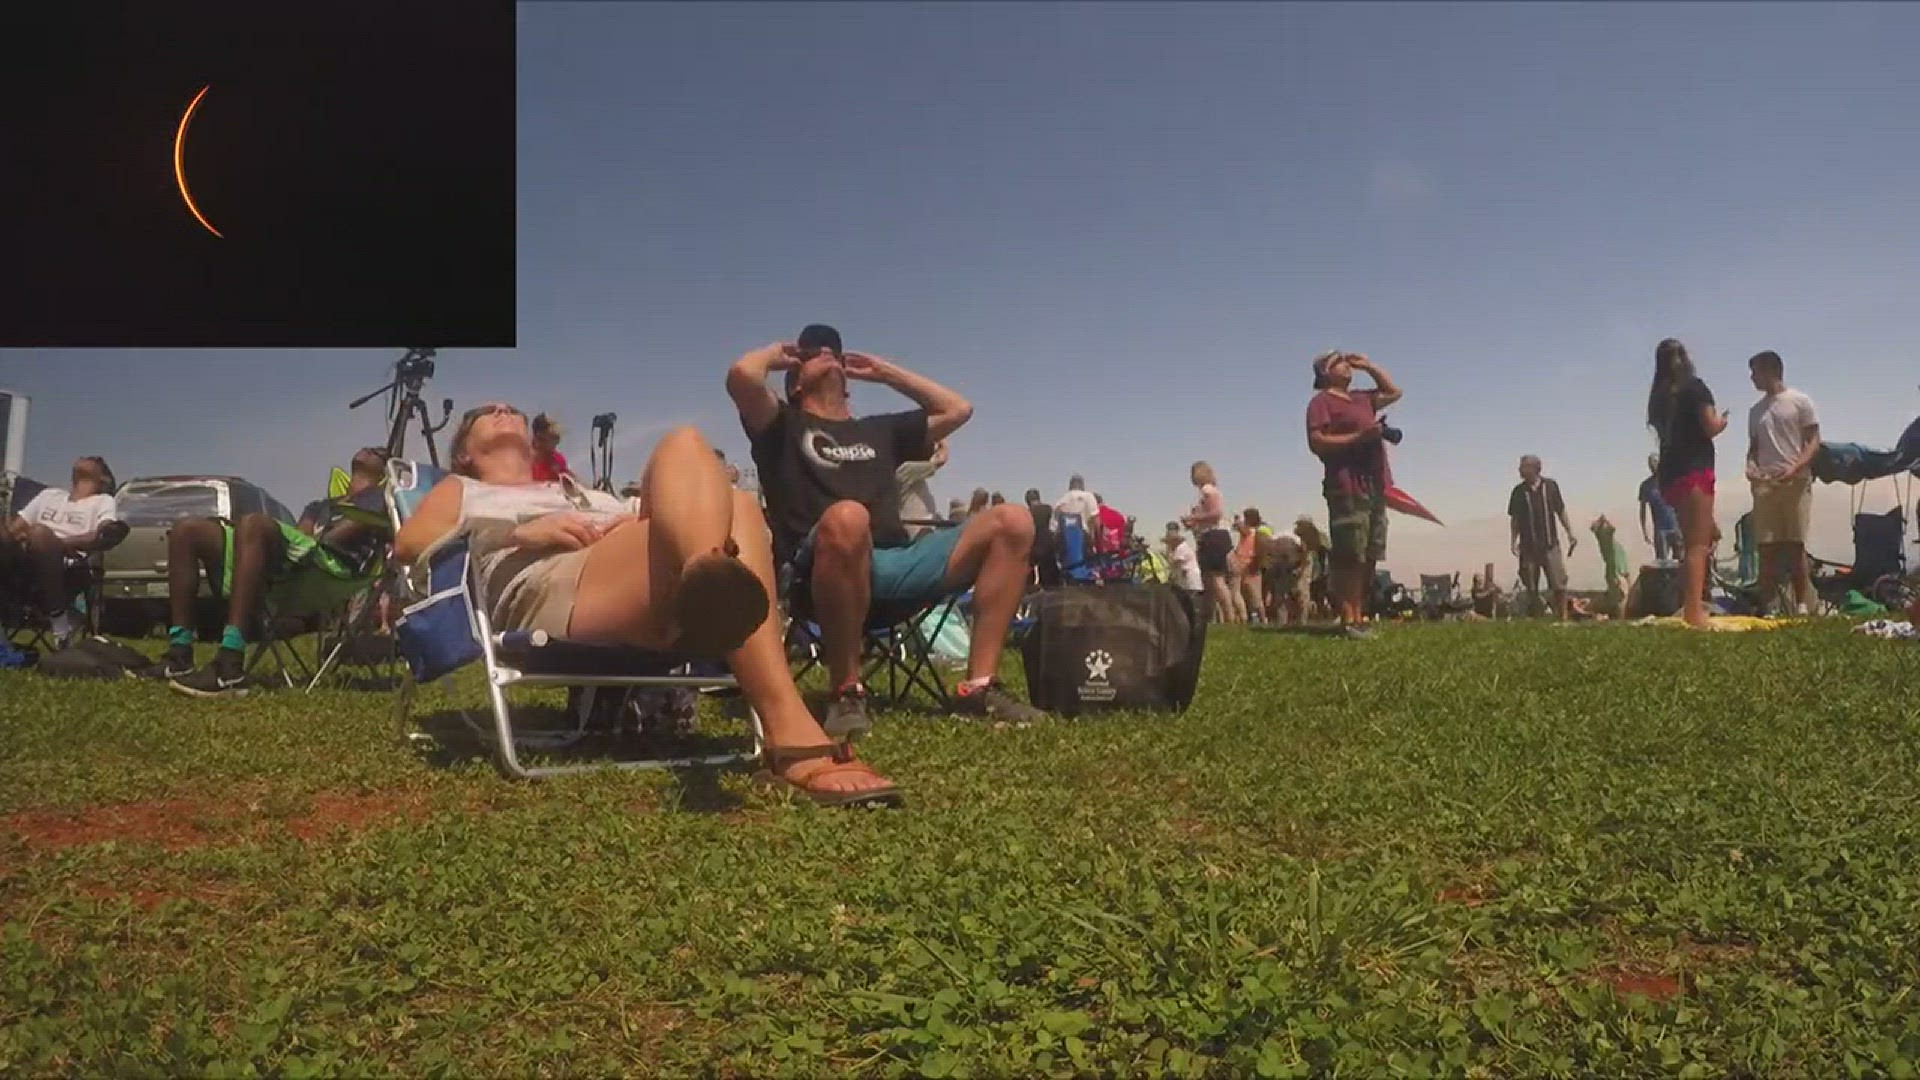 Watch a time lapse of the total solar eclipse in Tsali Notch Vineyard in Sweetwater, Tenn.  side by side with the crowd's reaction.